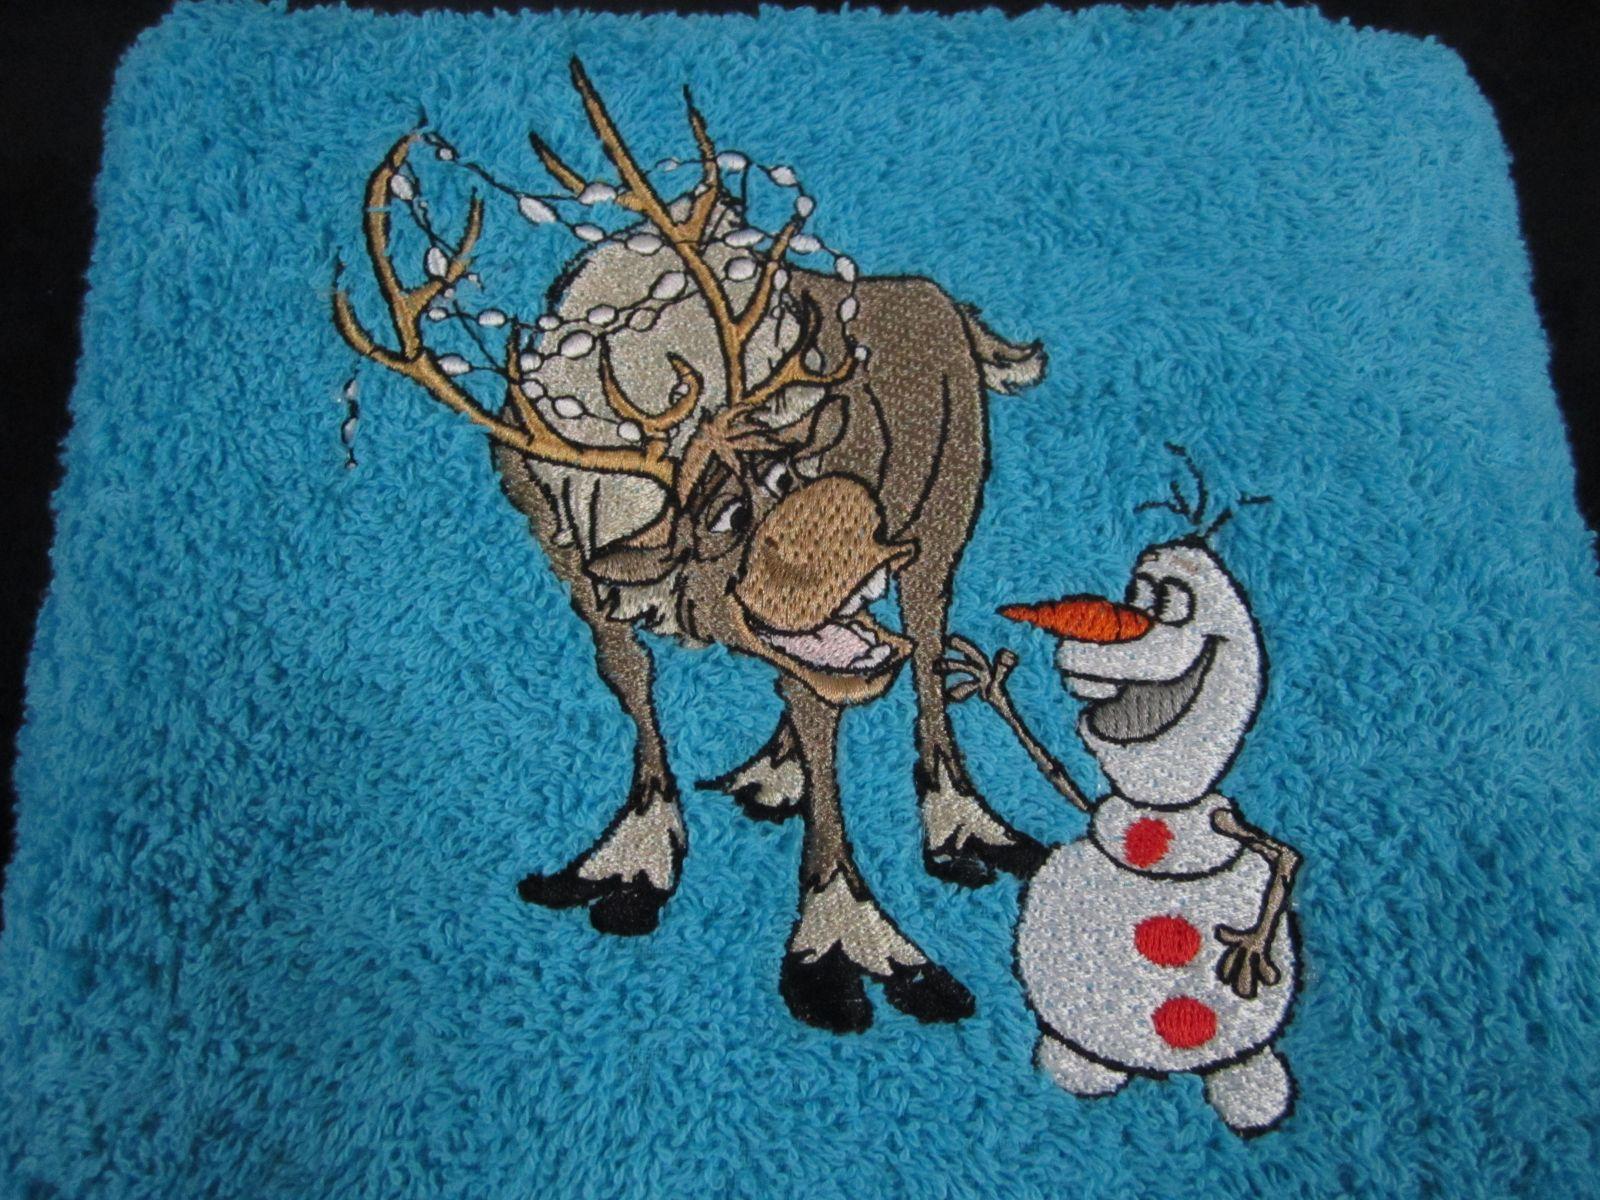 Embroidered towel with Sven and Olaf